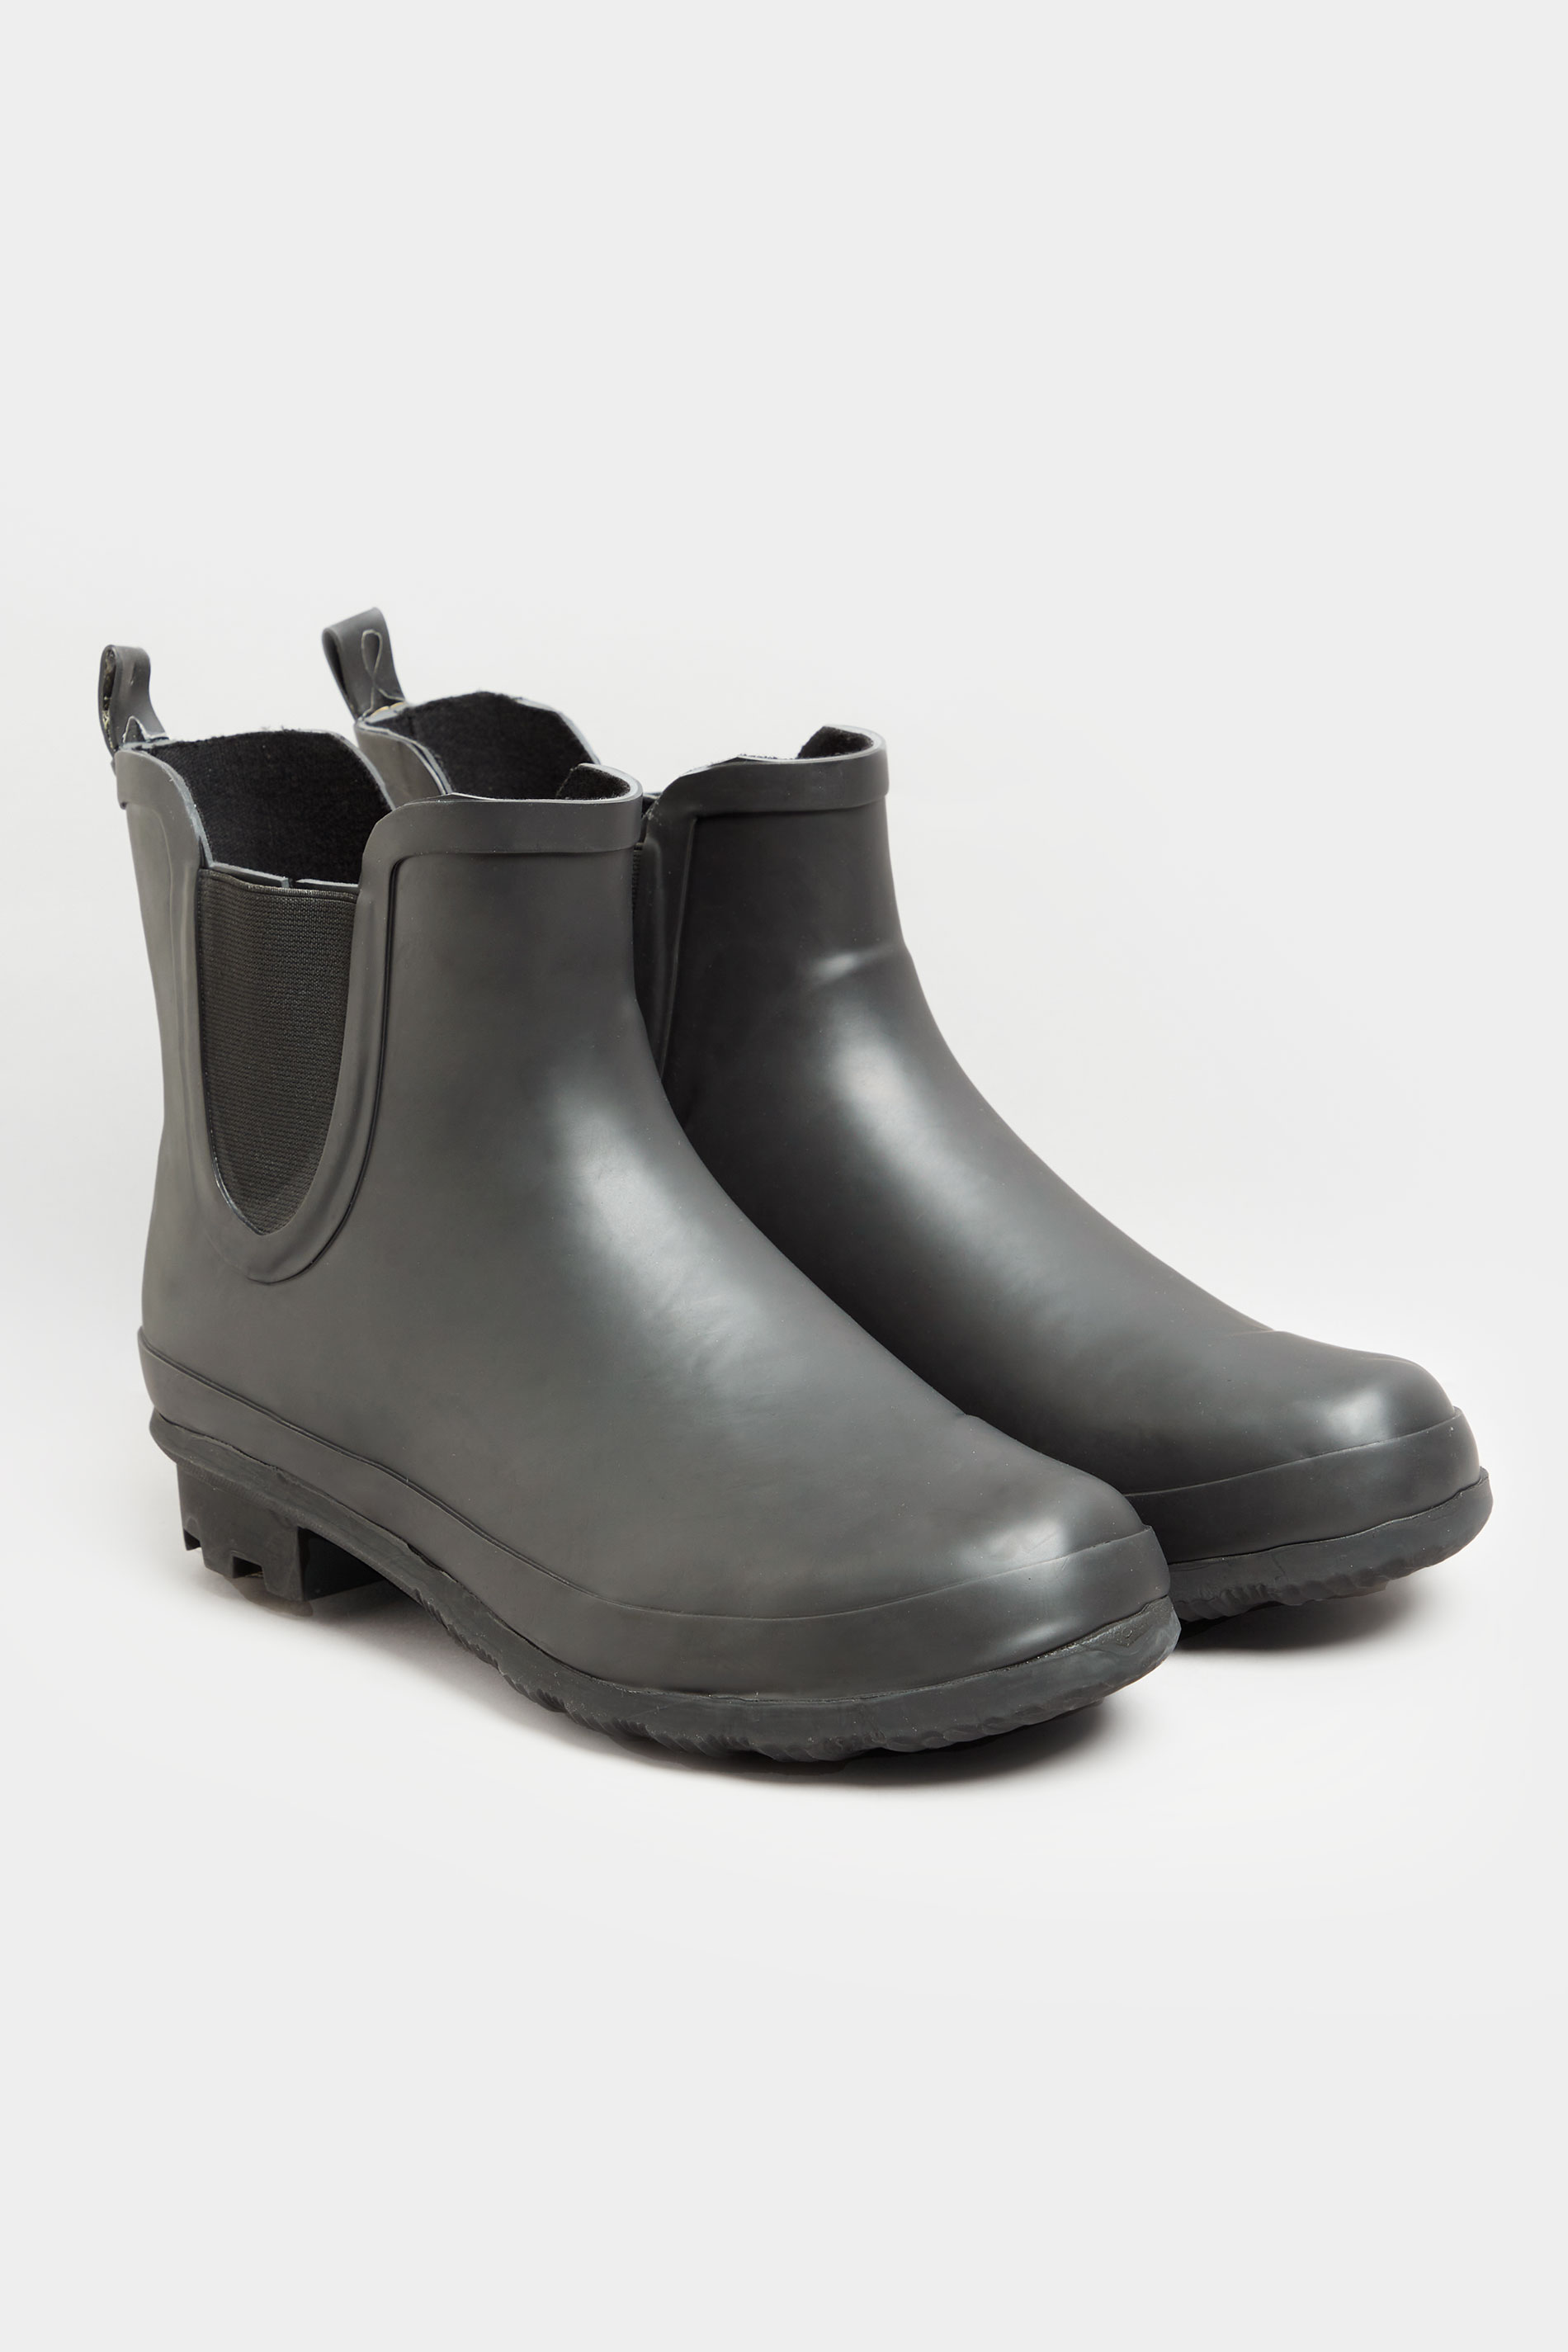 Black Heeled Chelsea Welly Boots in Extra Wide Fit_R.jpg